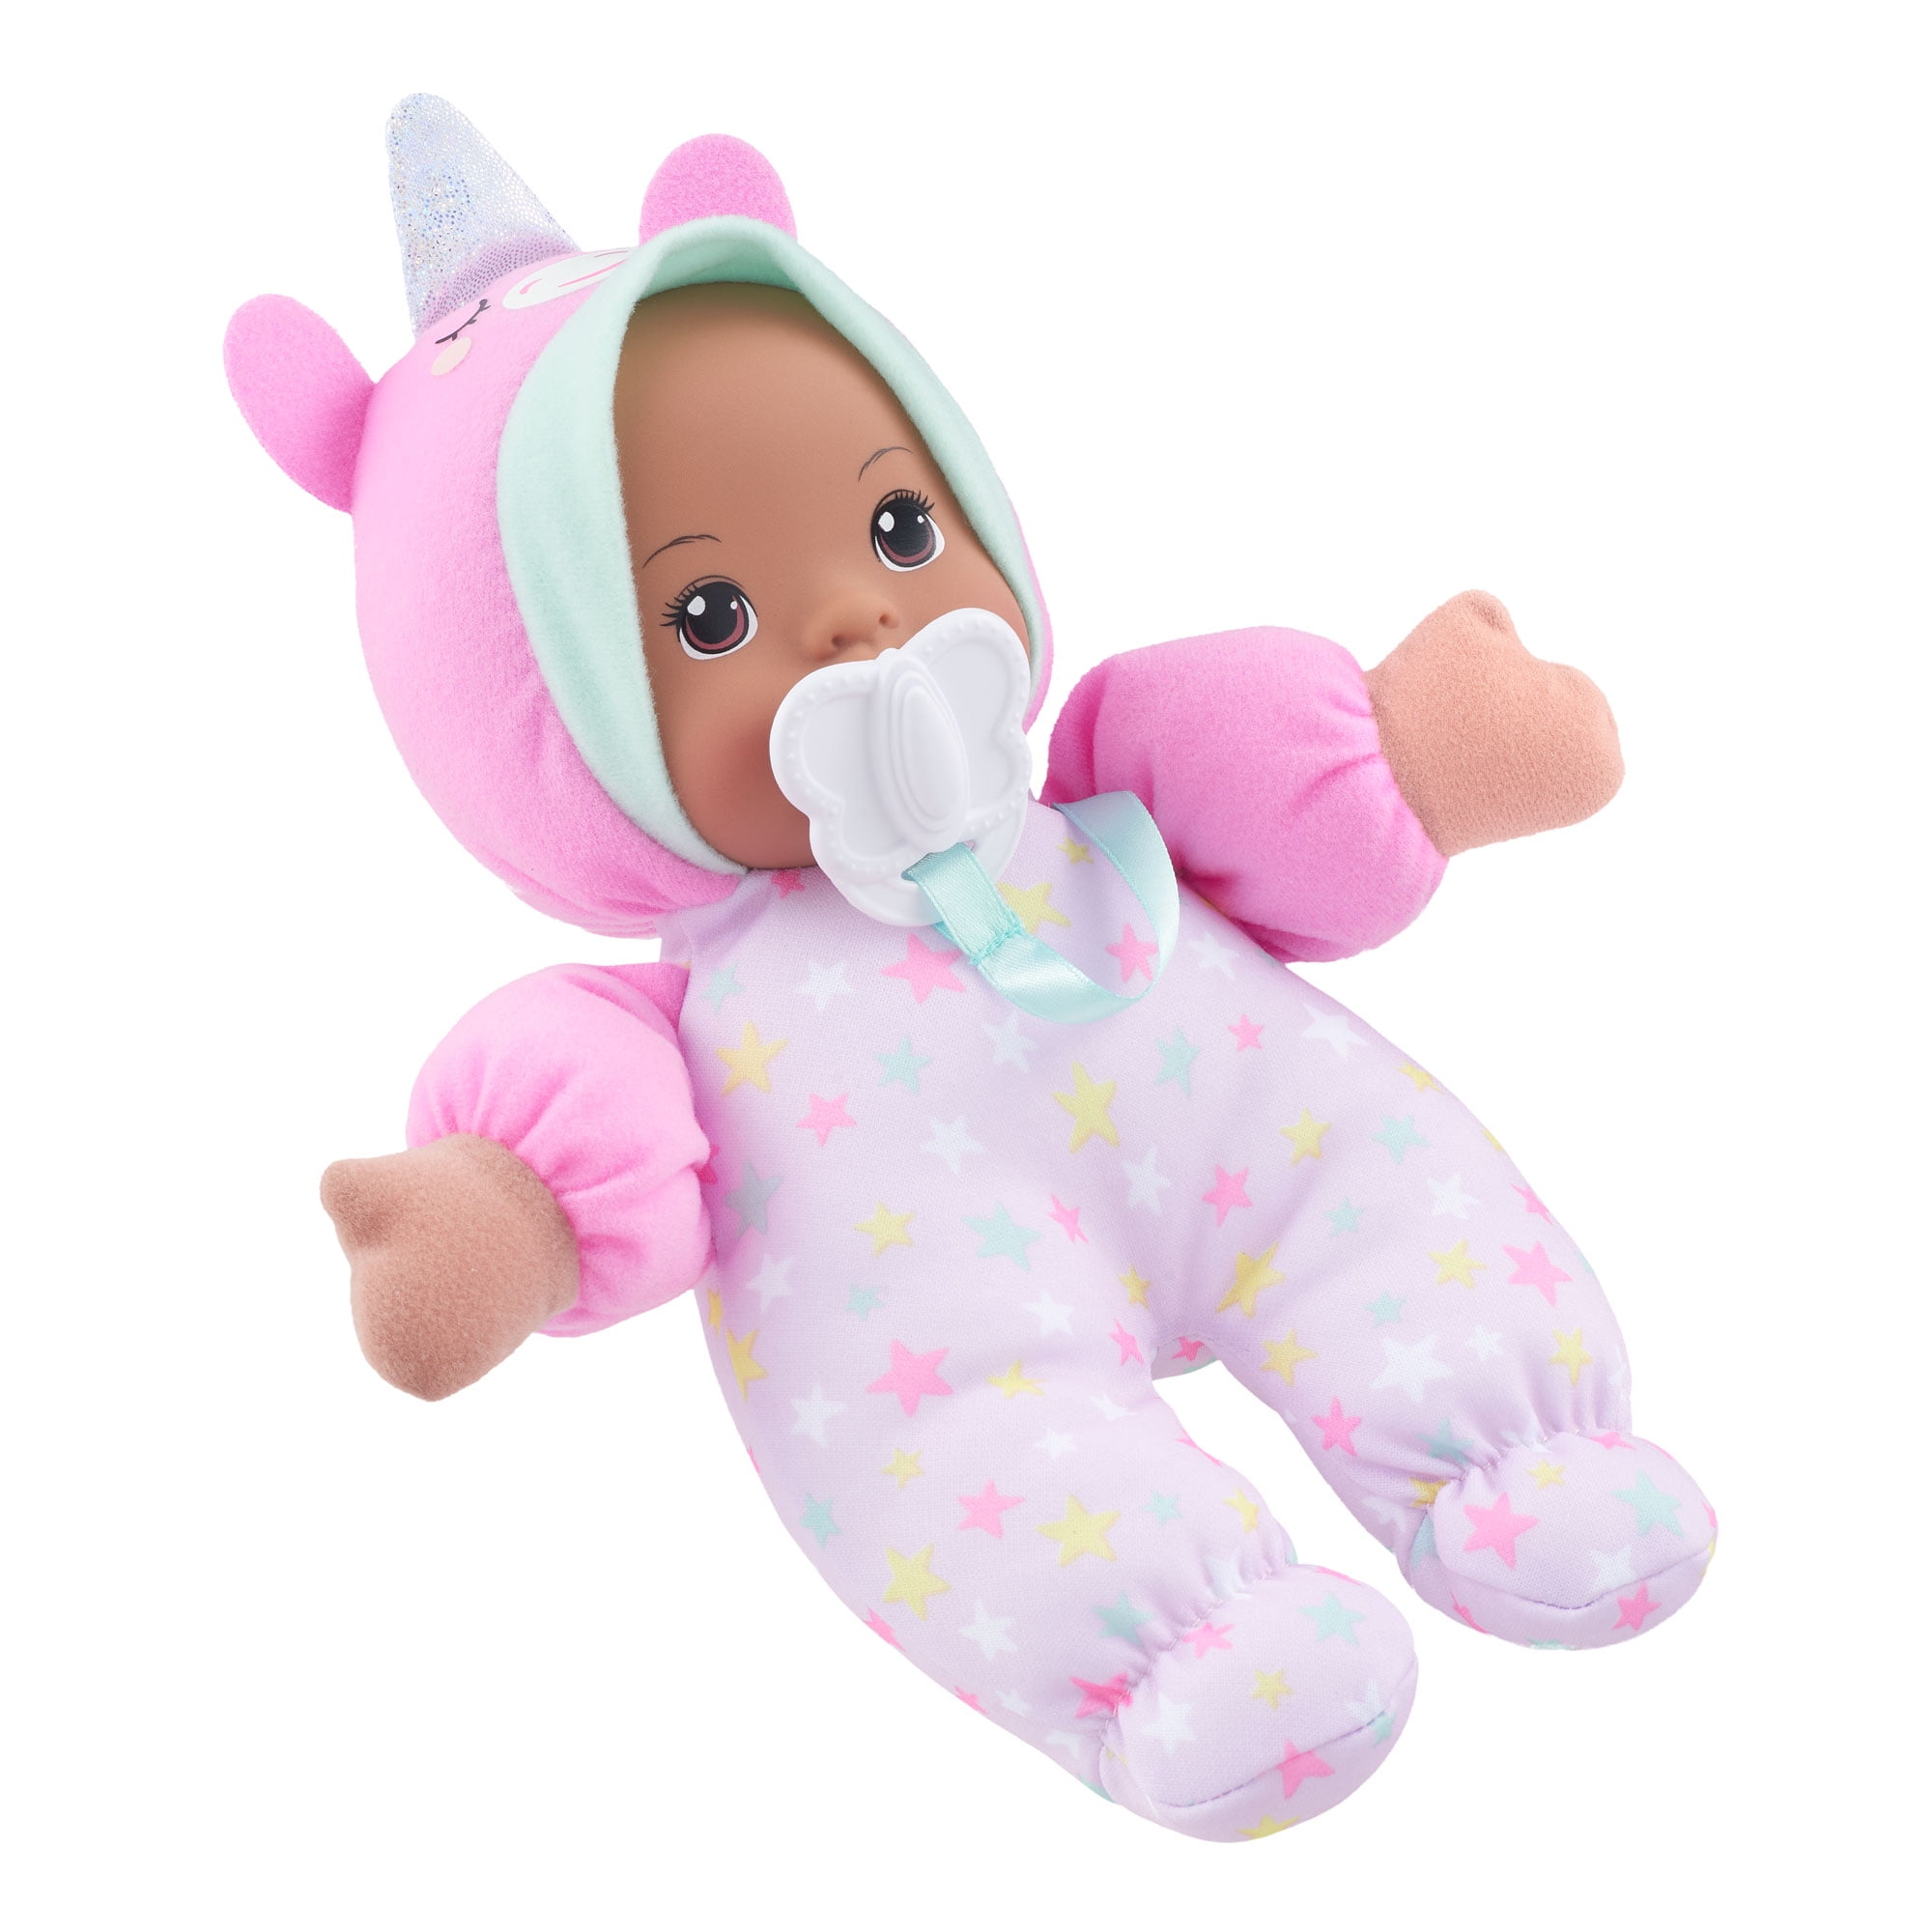 My Sweet Love 10-Inch Soft Baby Doll with Pacifier & Unicorn Outfit, Dark Skin Tone